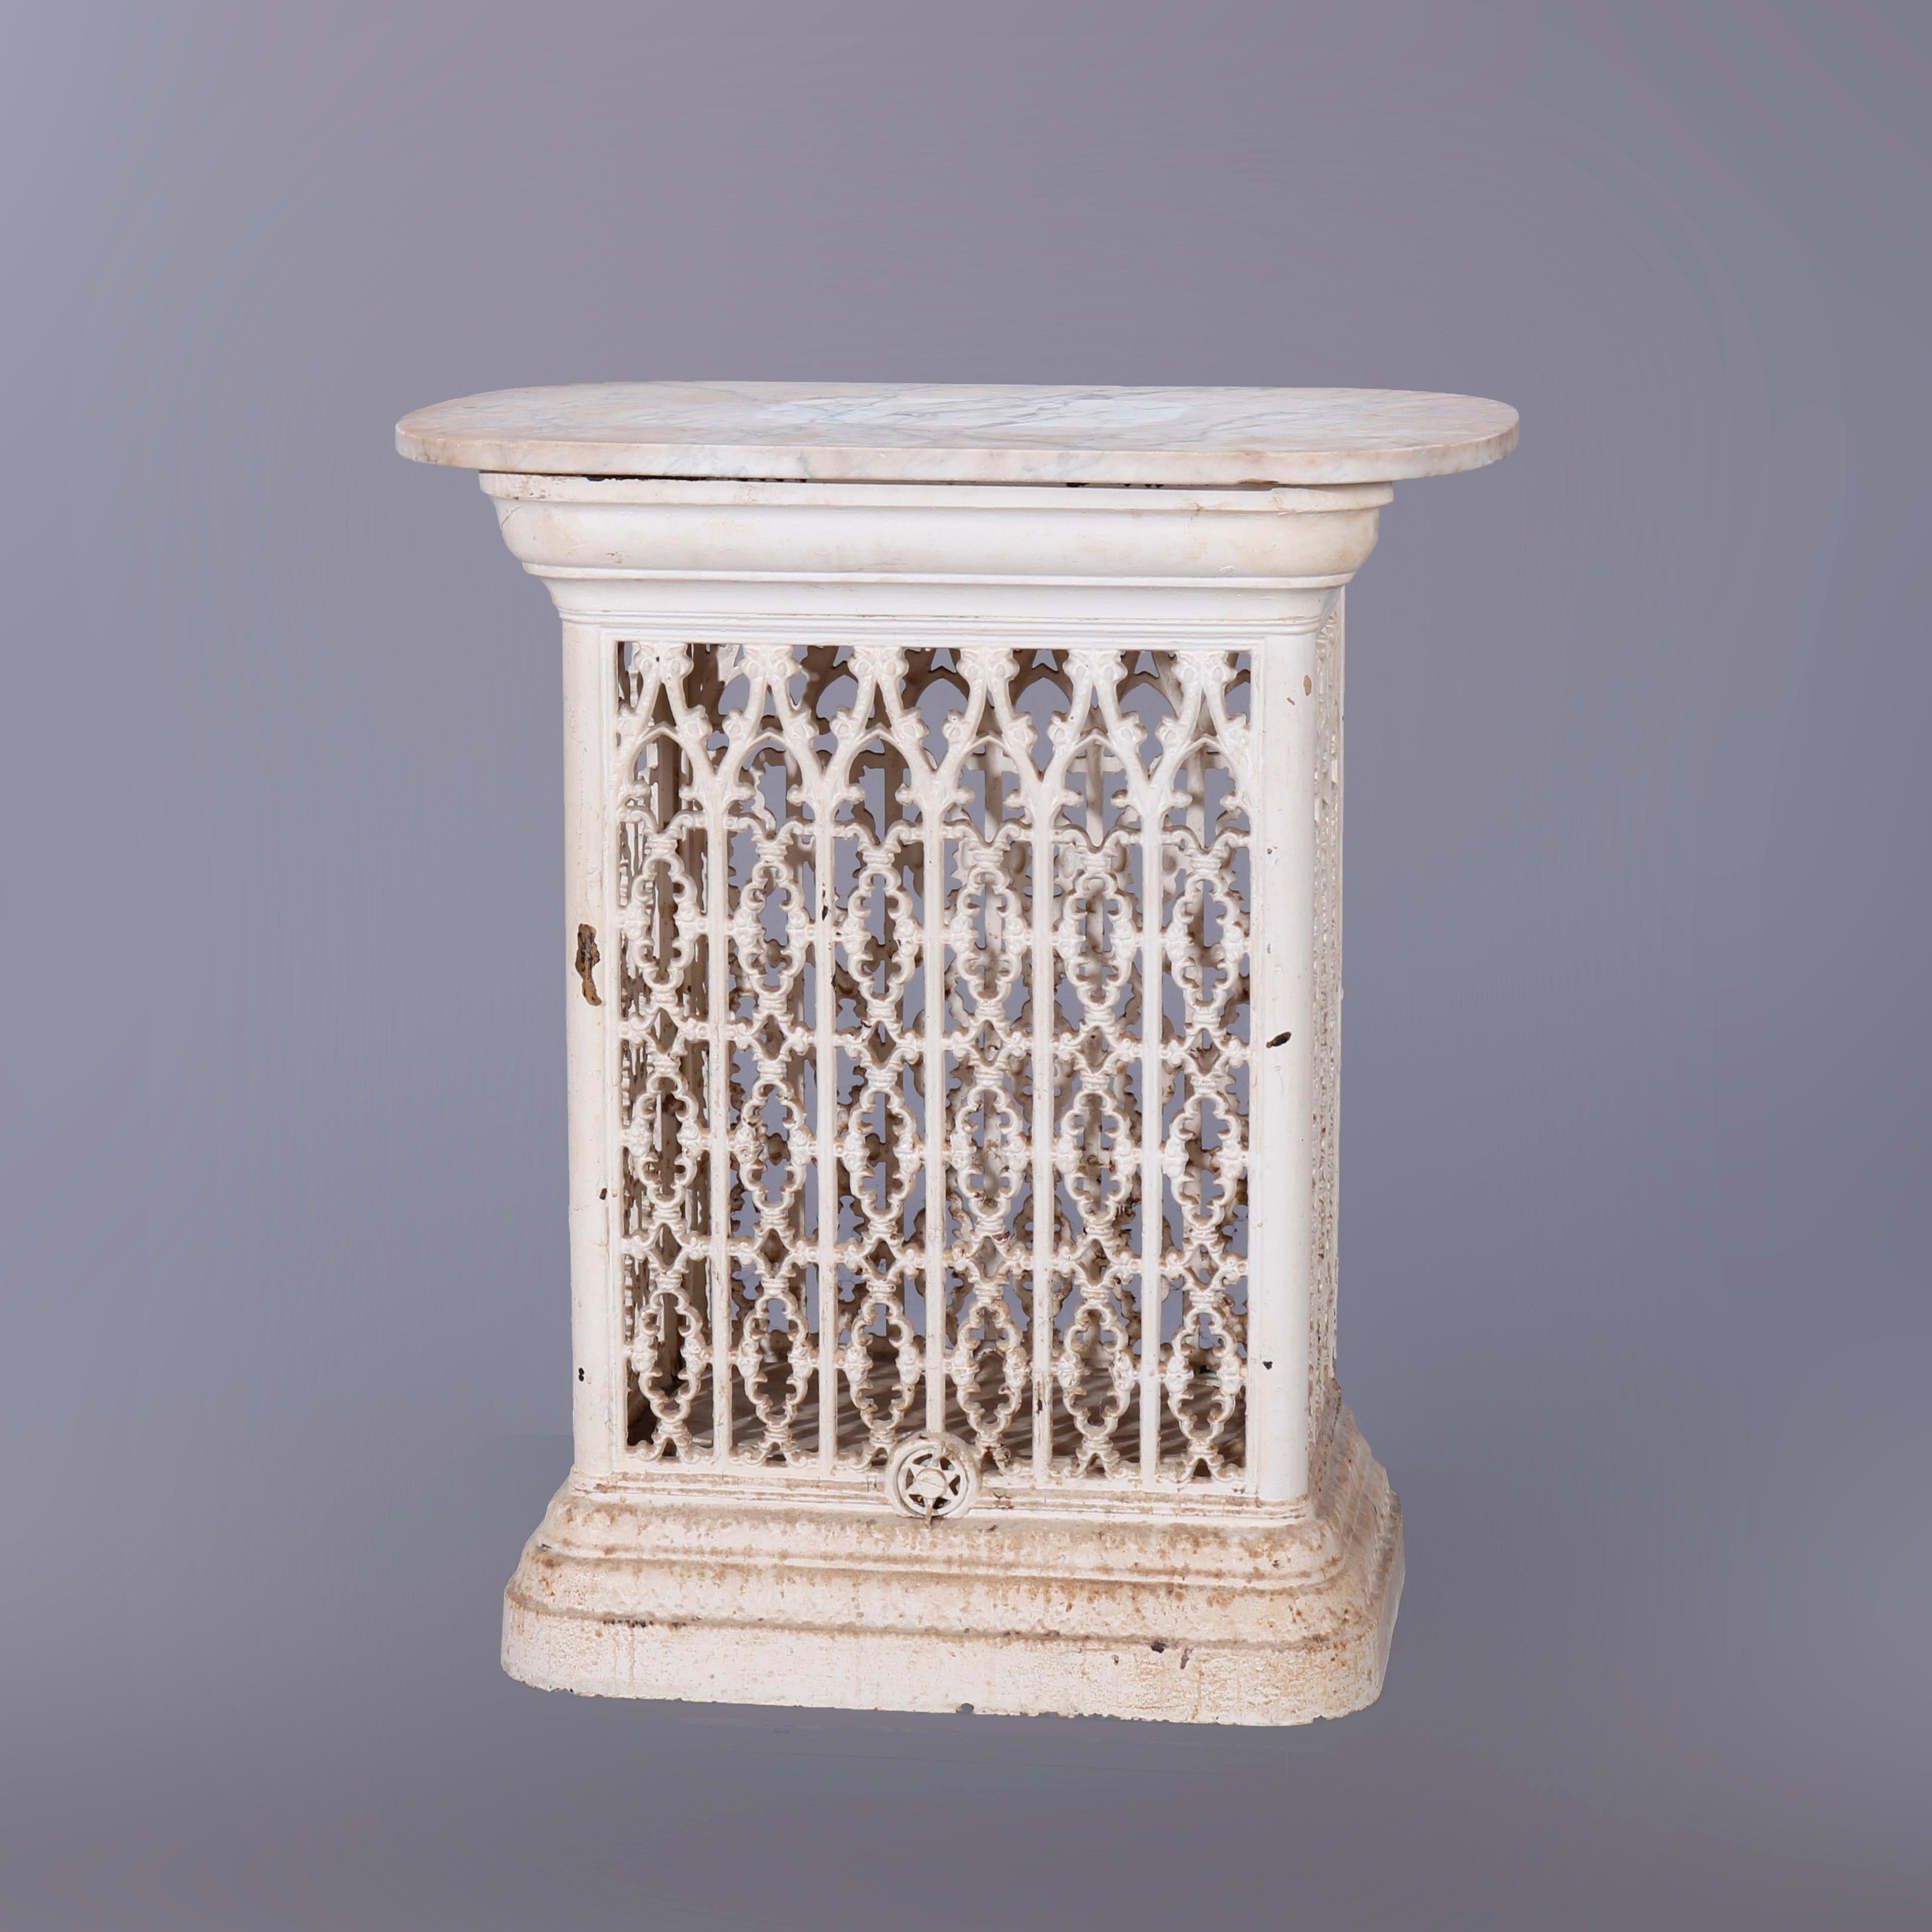 An antique architectural garden table offers marble top surmounting painted cast iron reticulated basket base, repurposed architectural element, circa 1890

Measures - 30.75''H x 27''W x 17.75''D.